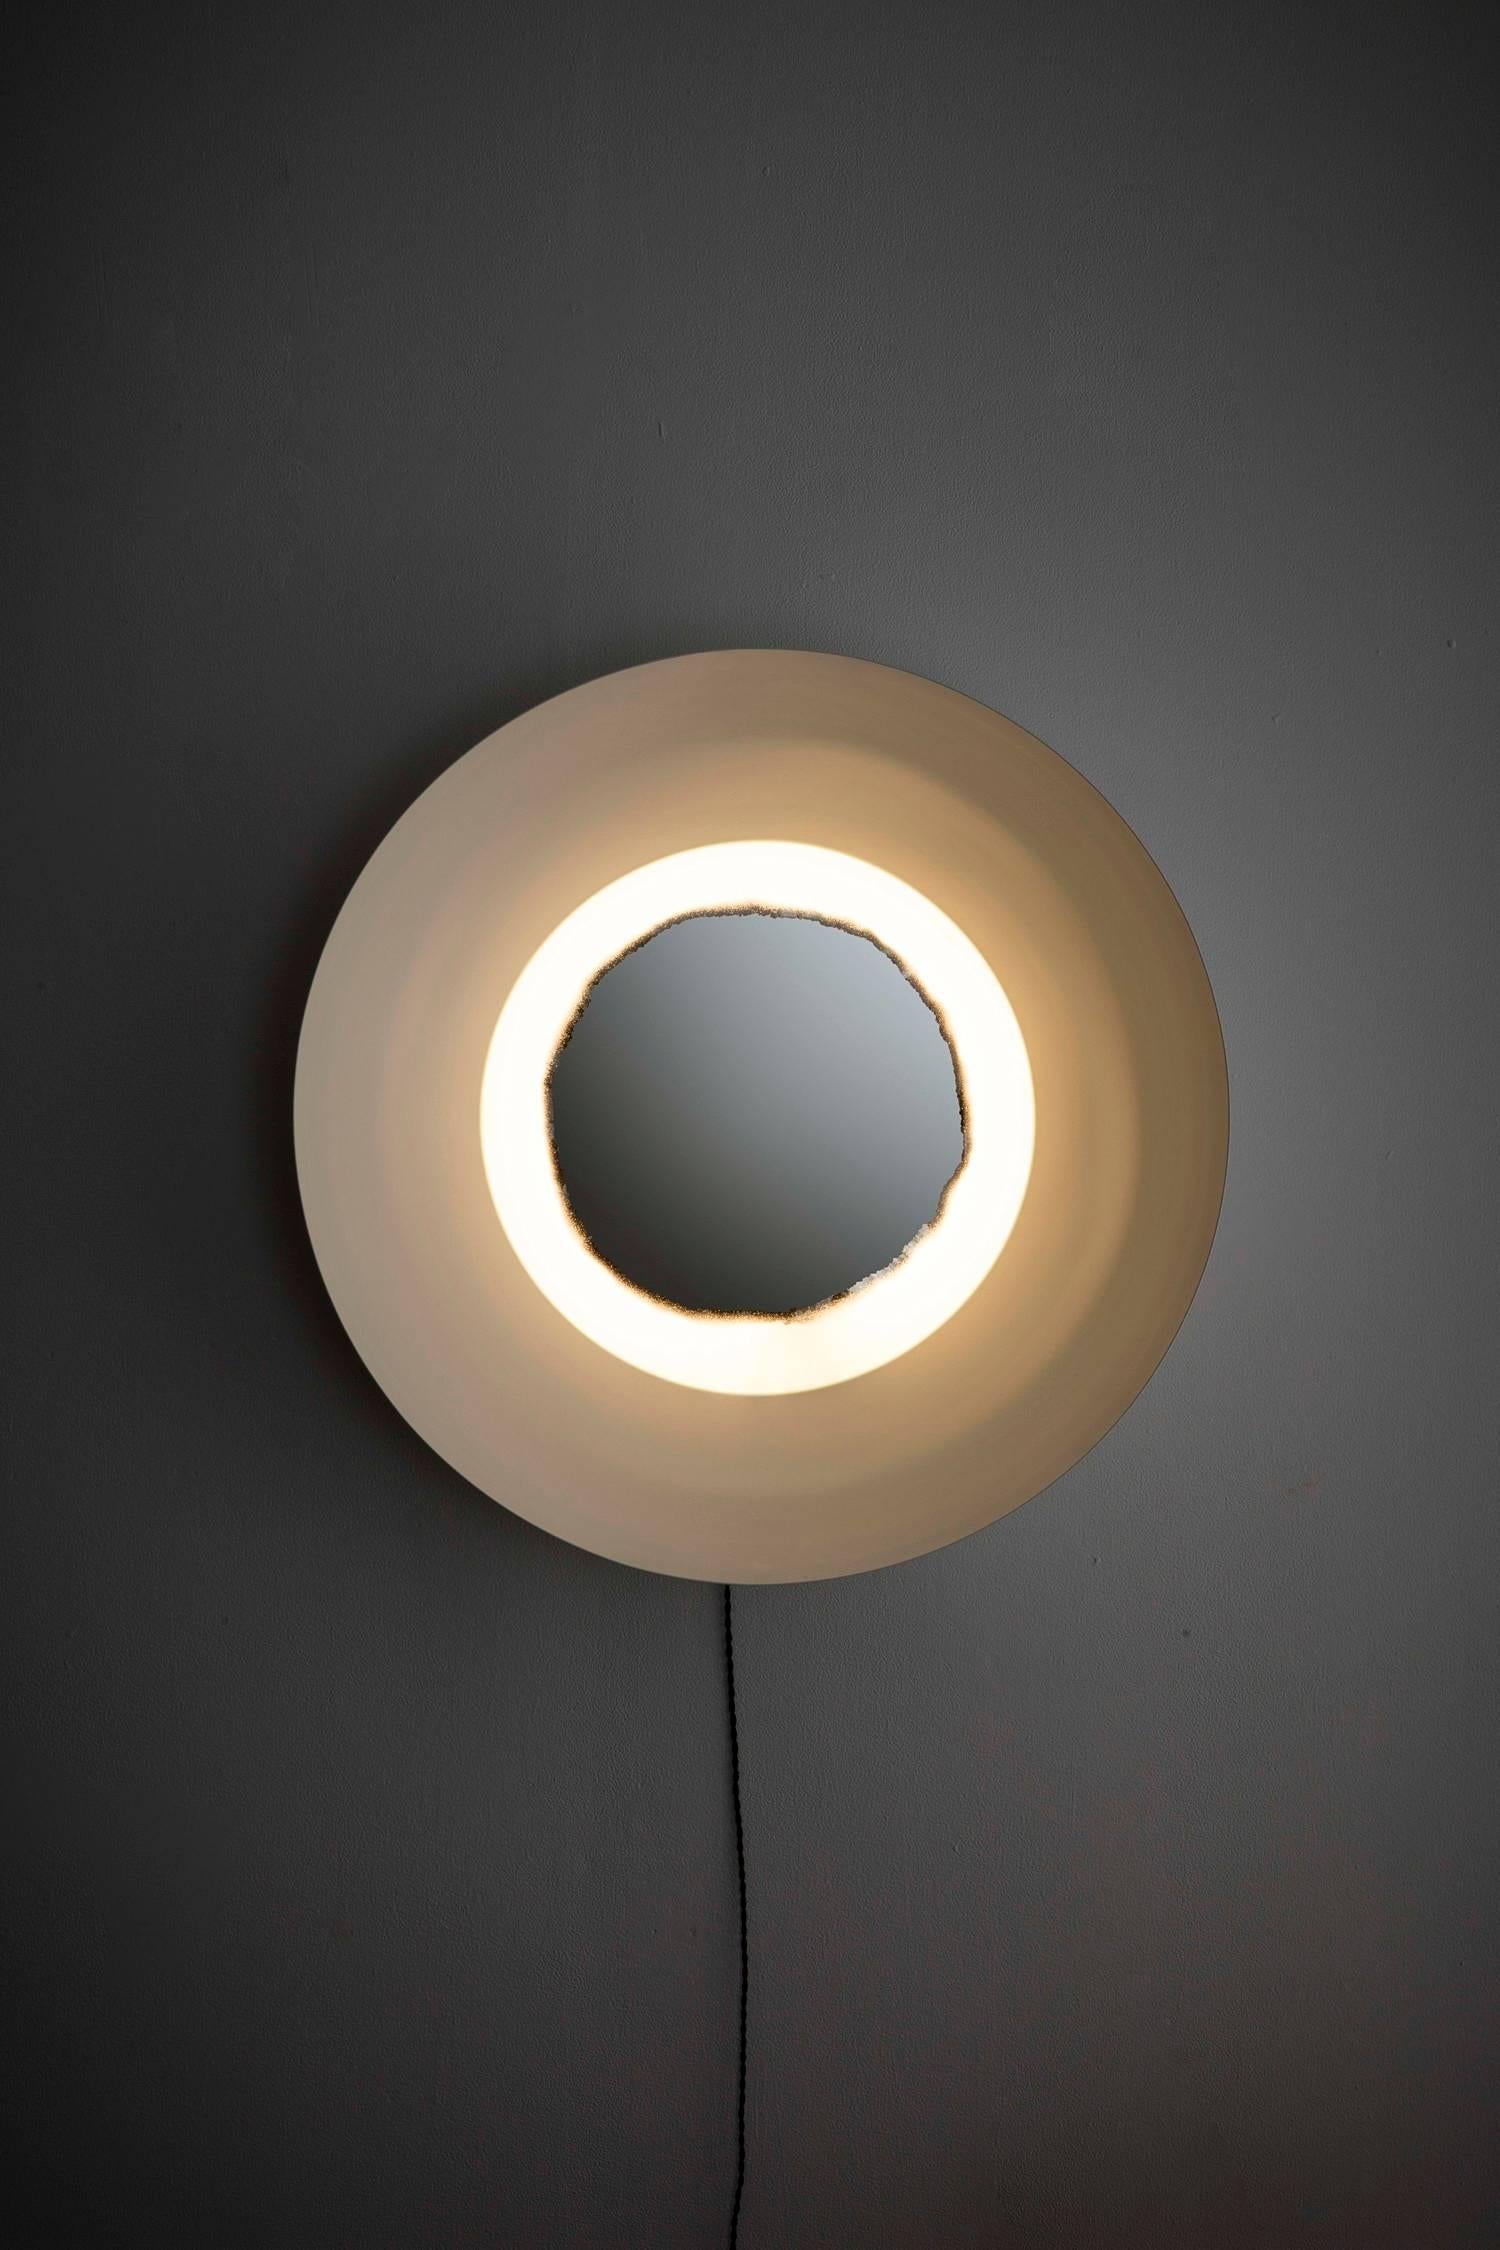 Powder-Coated Curved Light Wall Sconce - Powdercoated For Sale